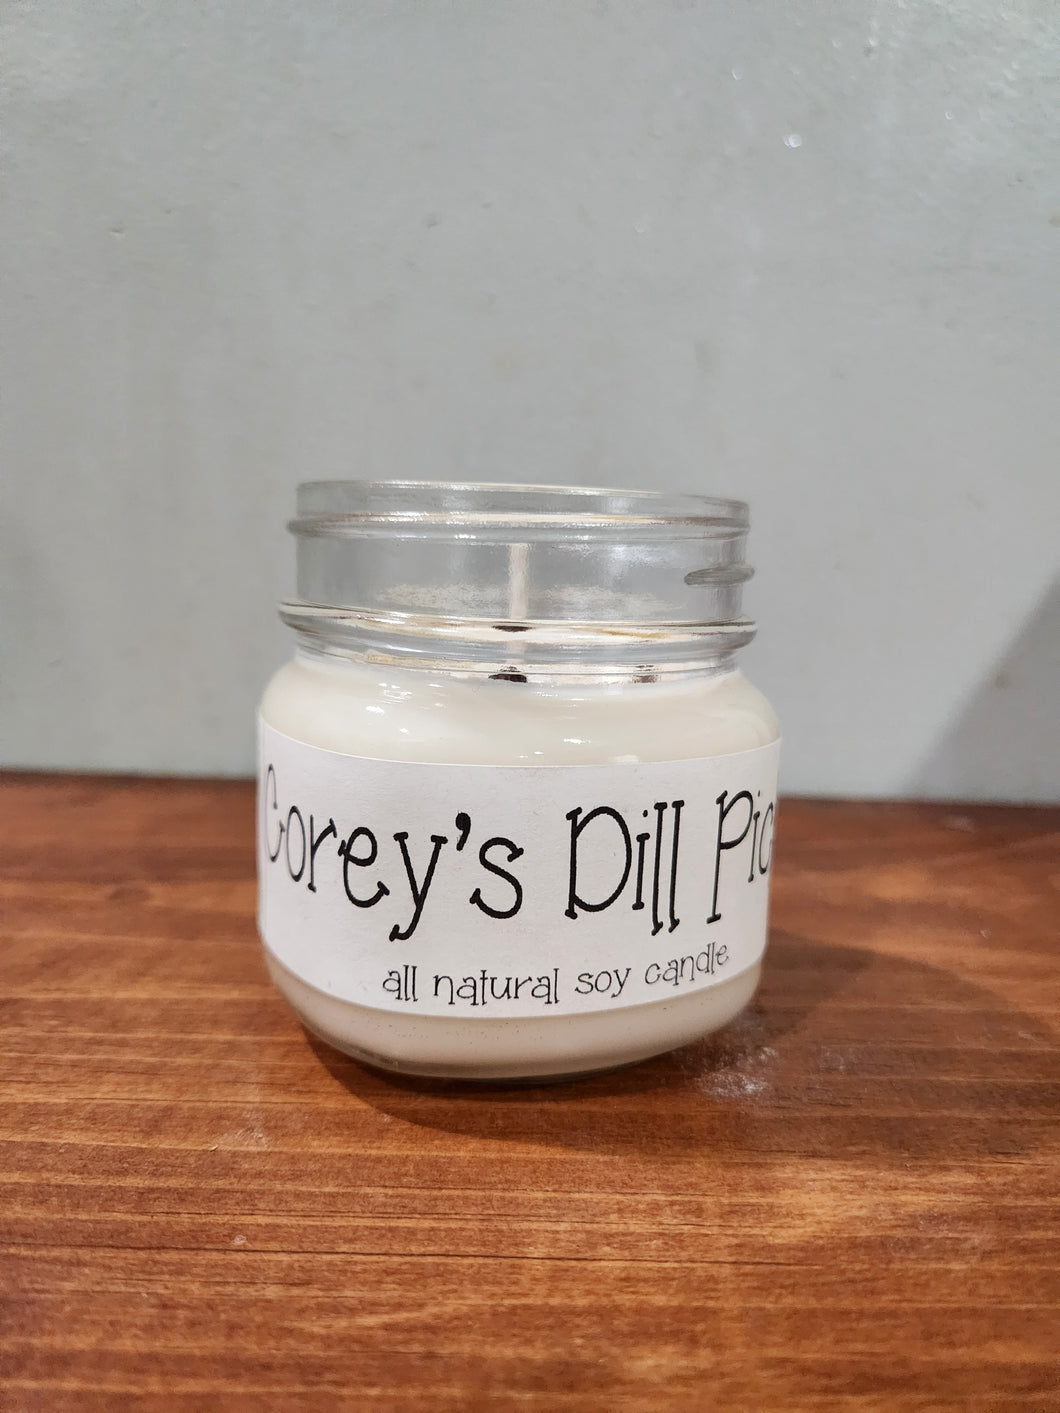 Corey's Dill Pickle All Natural Soy Candle, Local Hand Poured